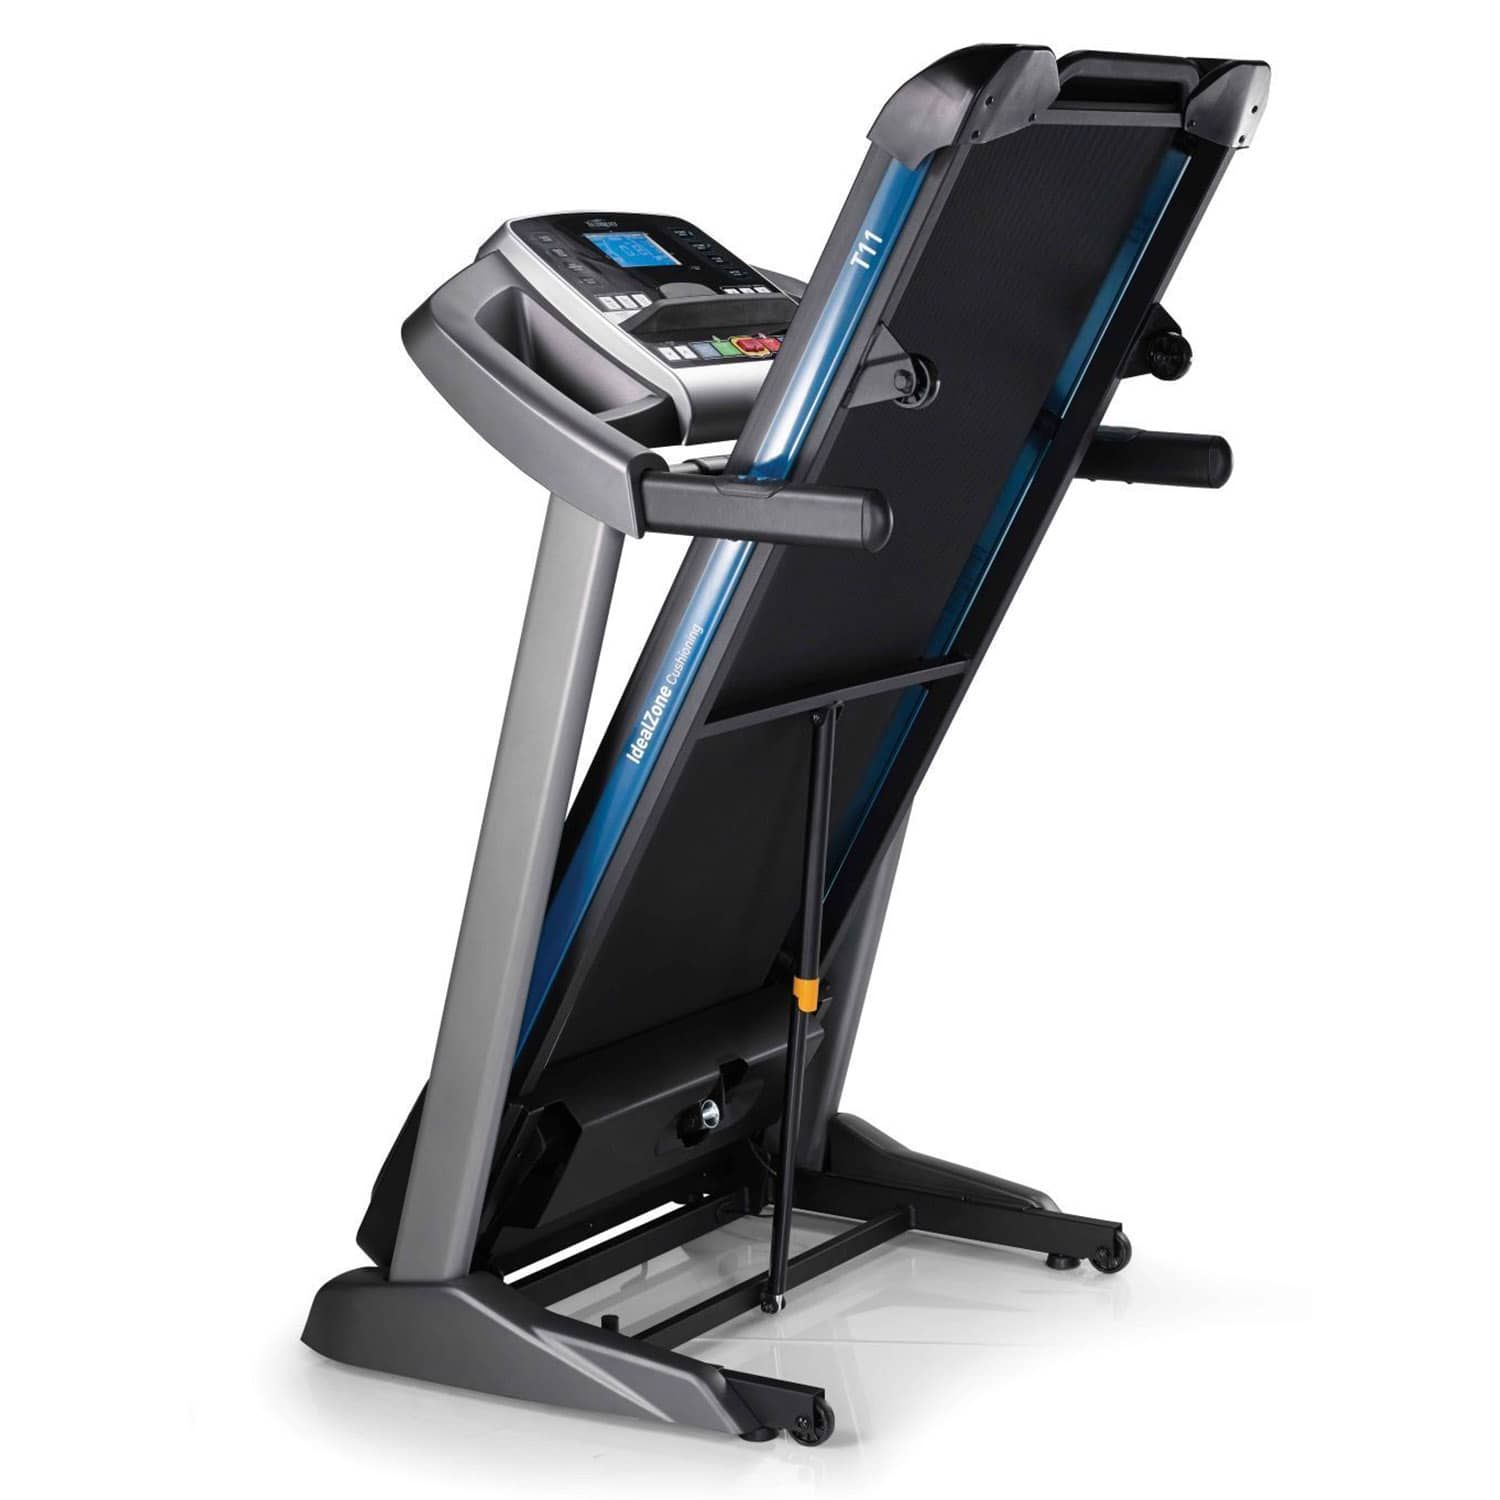 CE Horizon Fitness price Power Tempo best Online Treadmill House T11 UAE- Buy in at Fitness